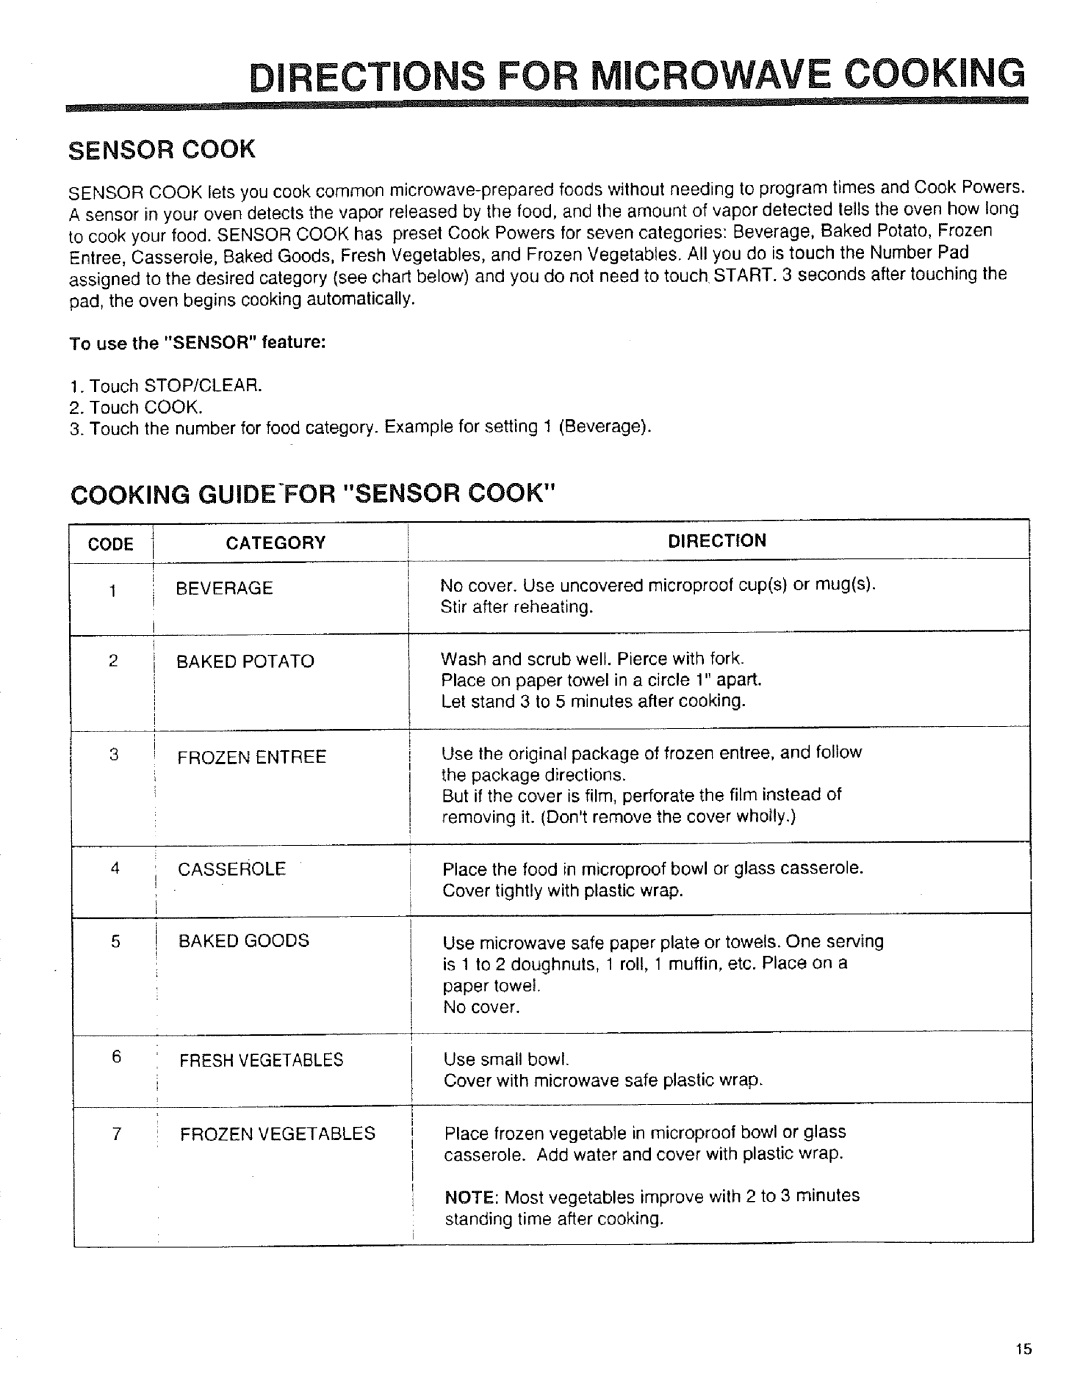 Sears 89952, 89951, 89950 manual Directions For Microwave Cooking, Sensor Cook, Guidefor 